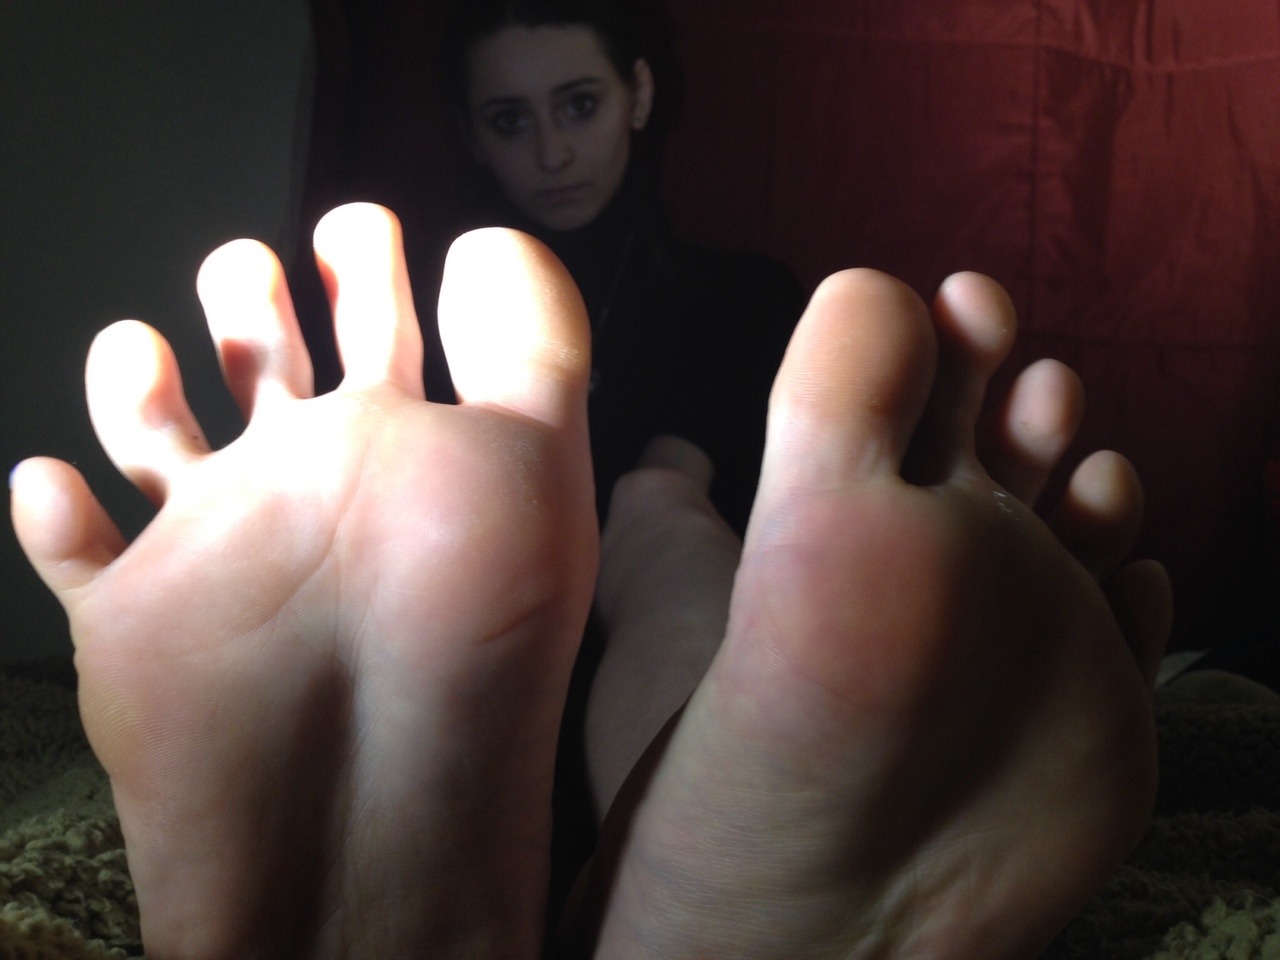 Thecatamongwolves Requests Follow Me I Feet